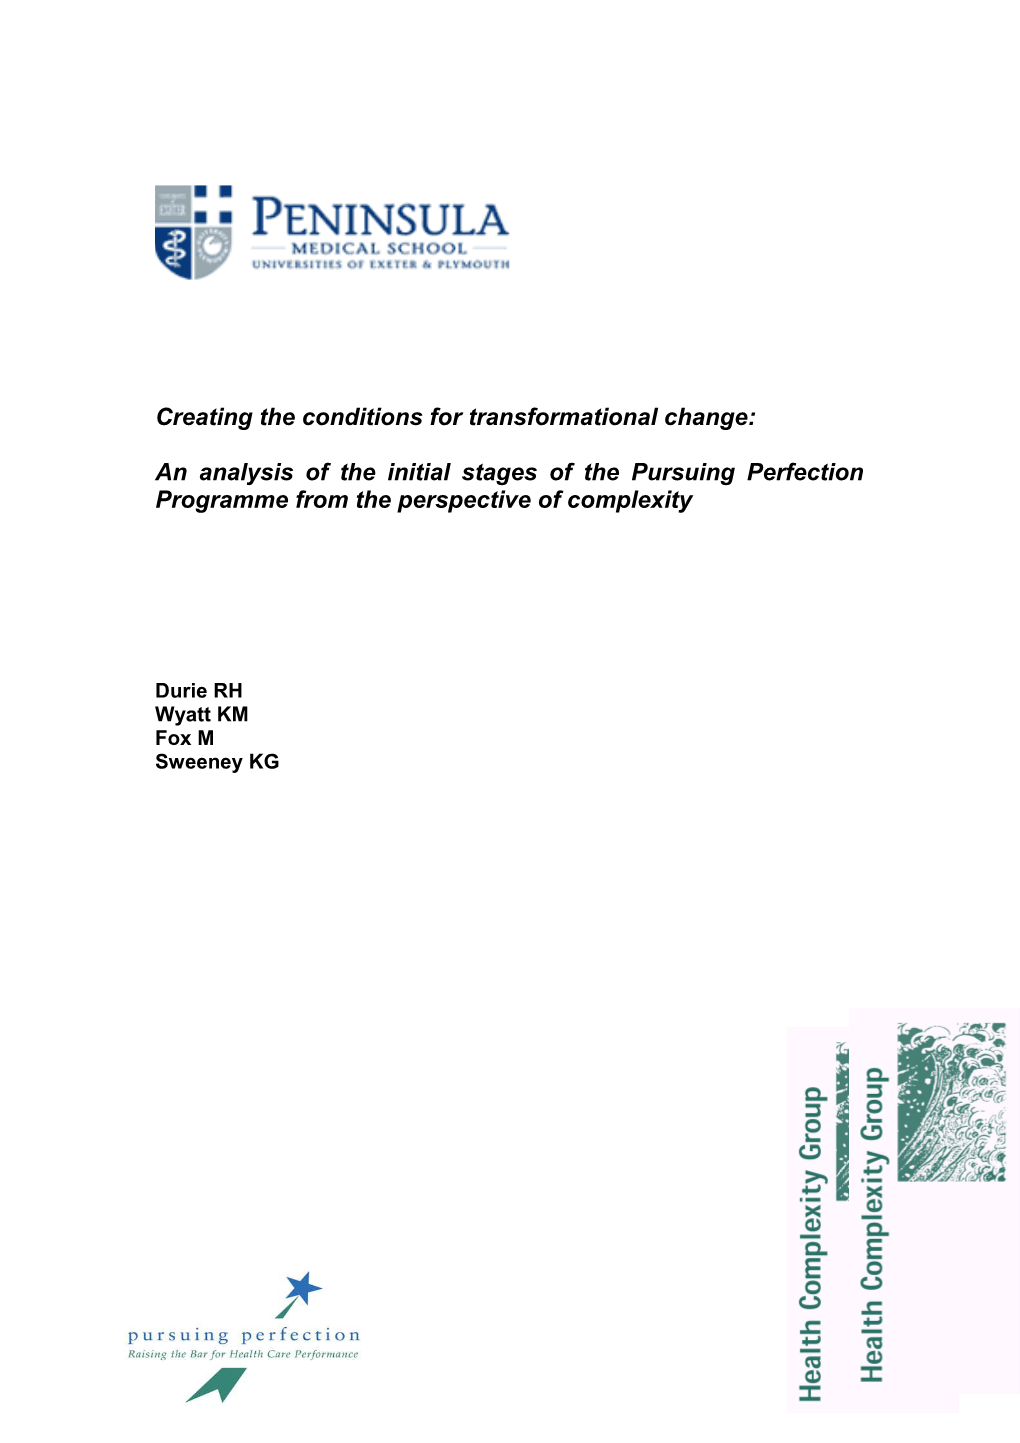 Pursuing Perfection Is an International Programme of Transformational Change in Health